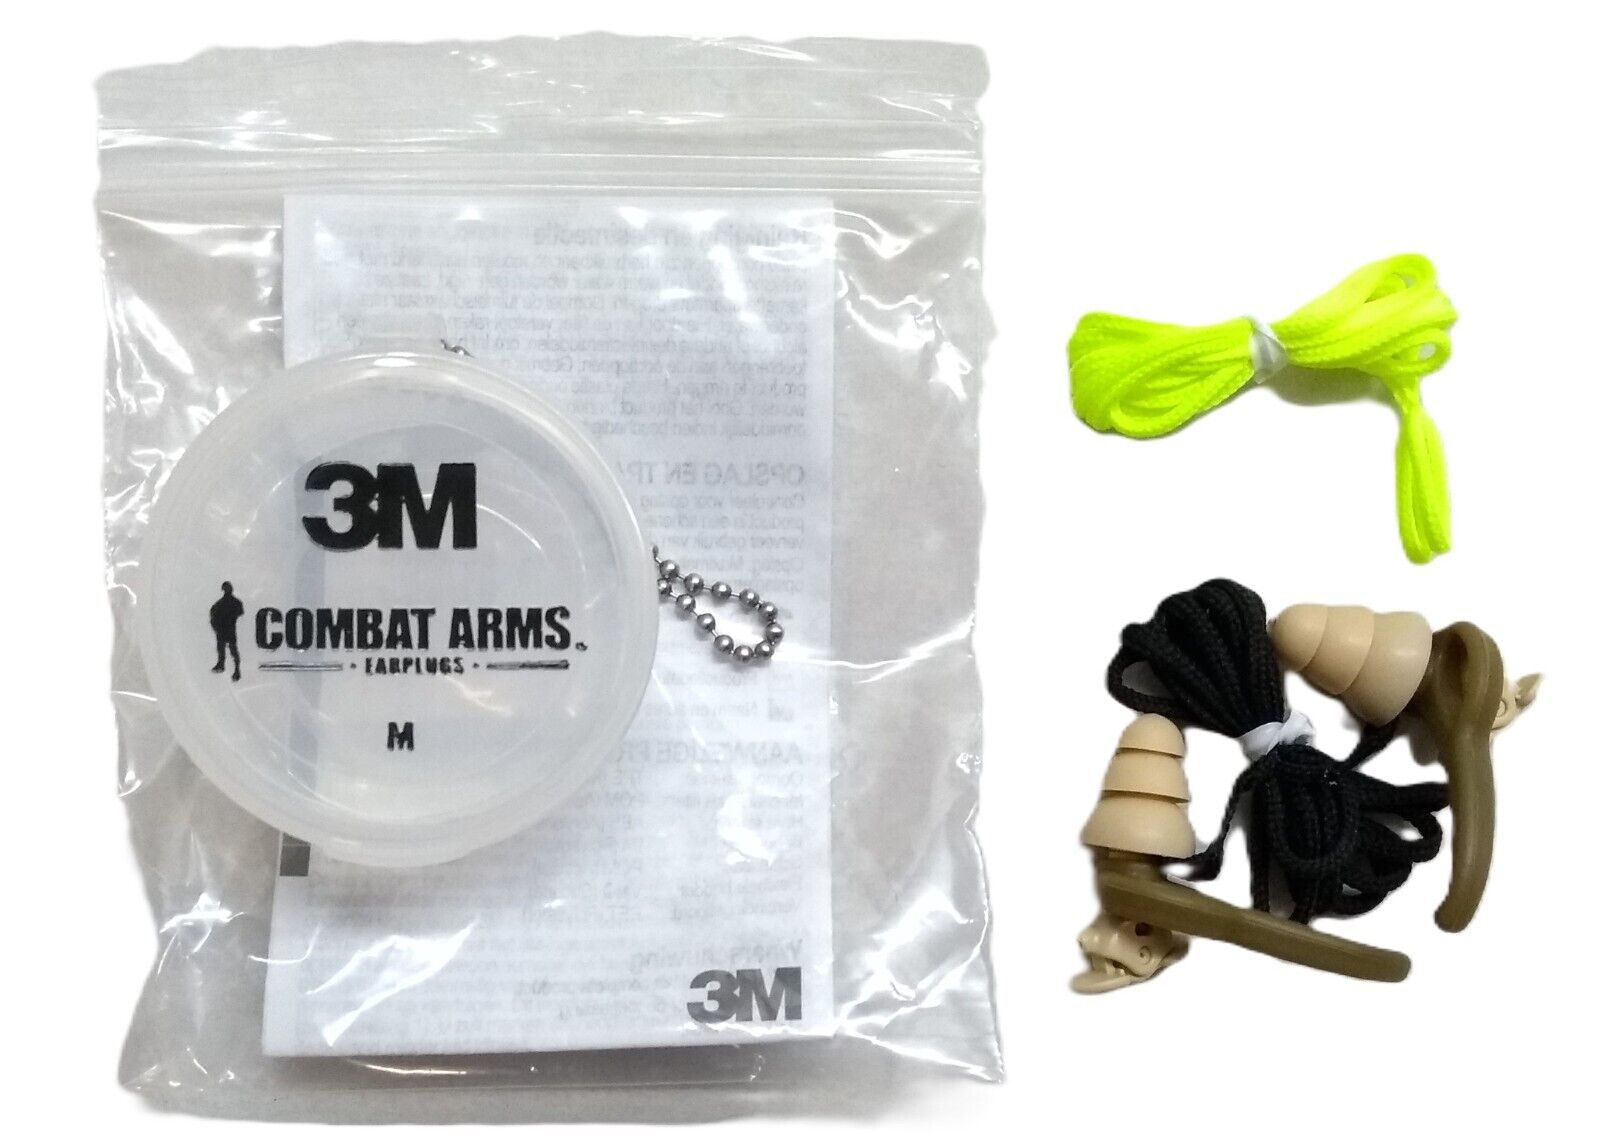 Genuine British Military Type Ear Plugs 3M Combat Arms In Storage Case MED NEW